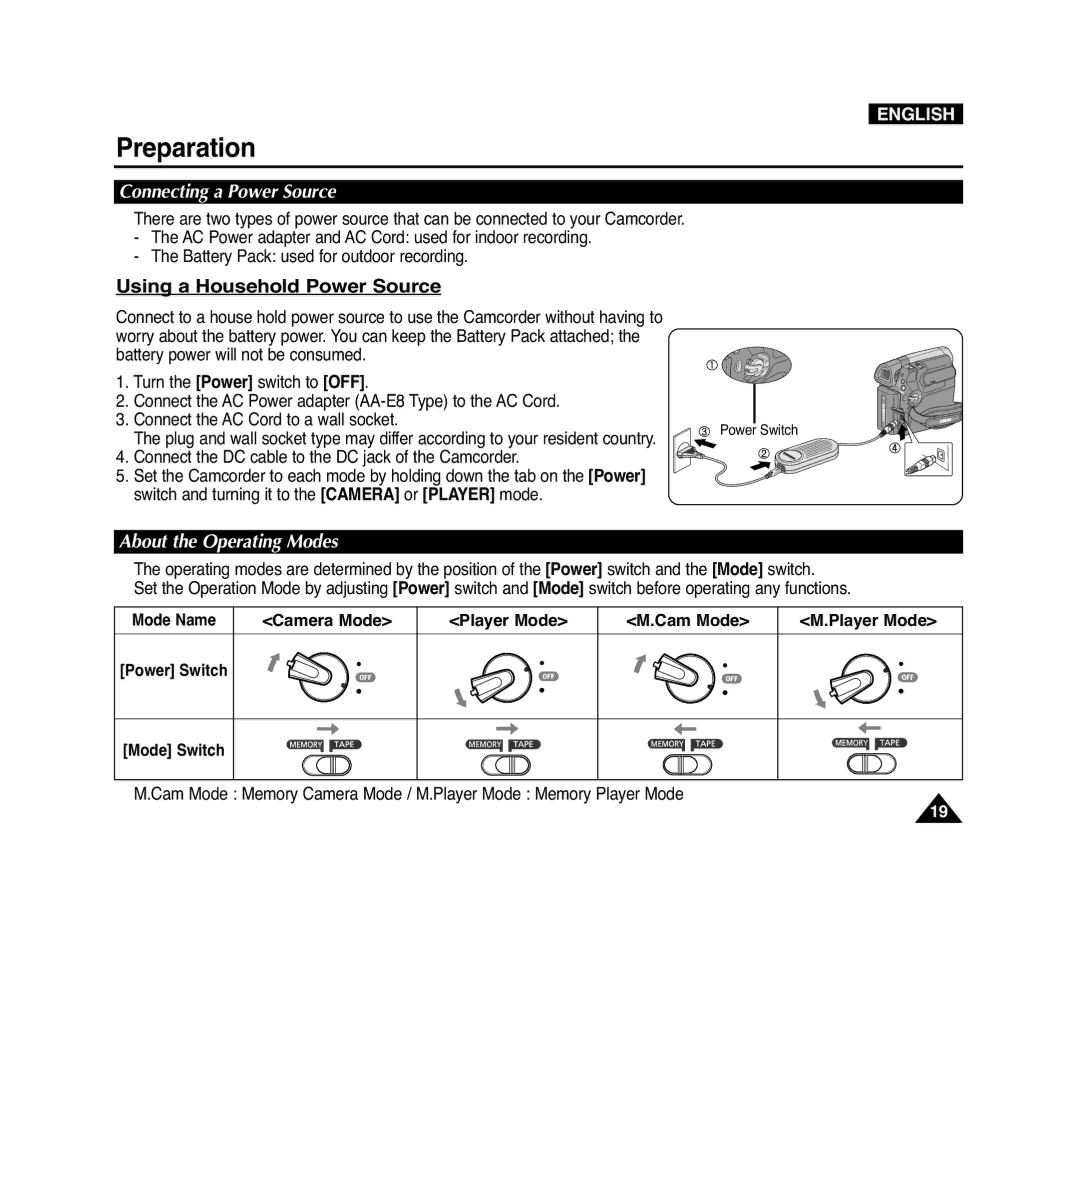 Samsung VP-D965Wi manual Using a Household Power Source, Connecting a Power Source, About the Operating Modes, Camera Mode 